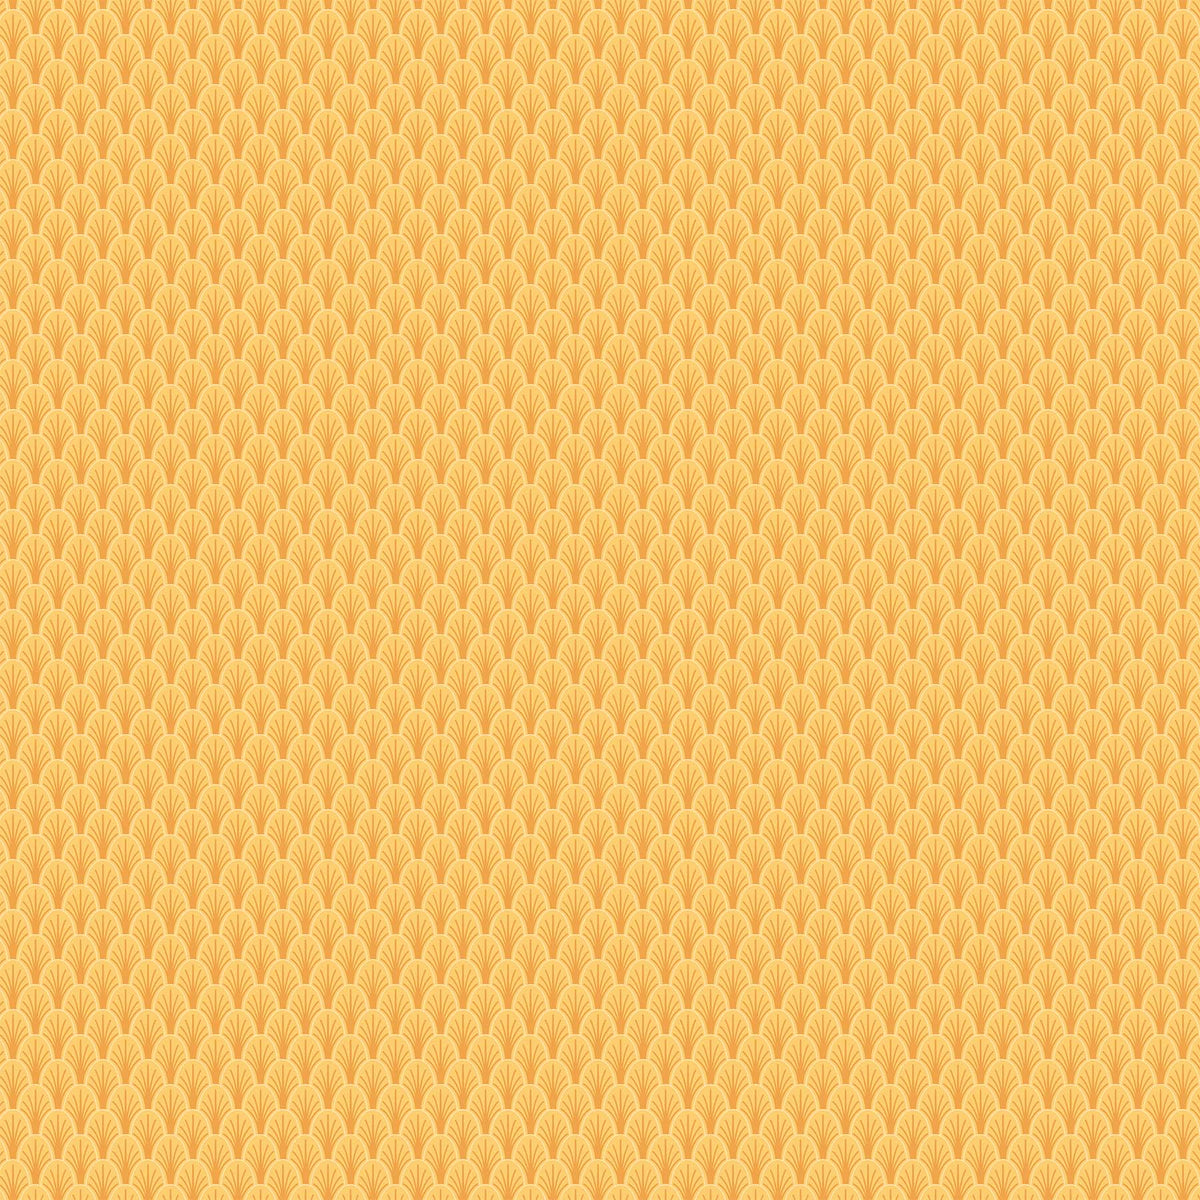 Happiness Quilt Fabric - Scallops in Yellow - 90598-50